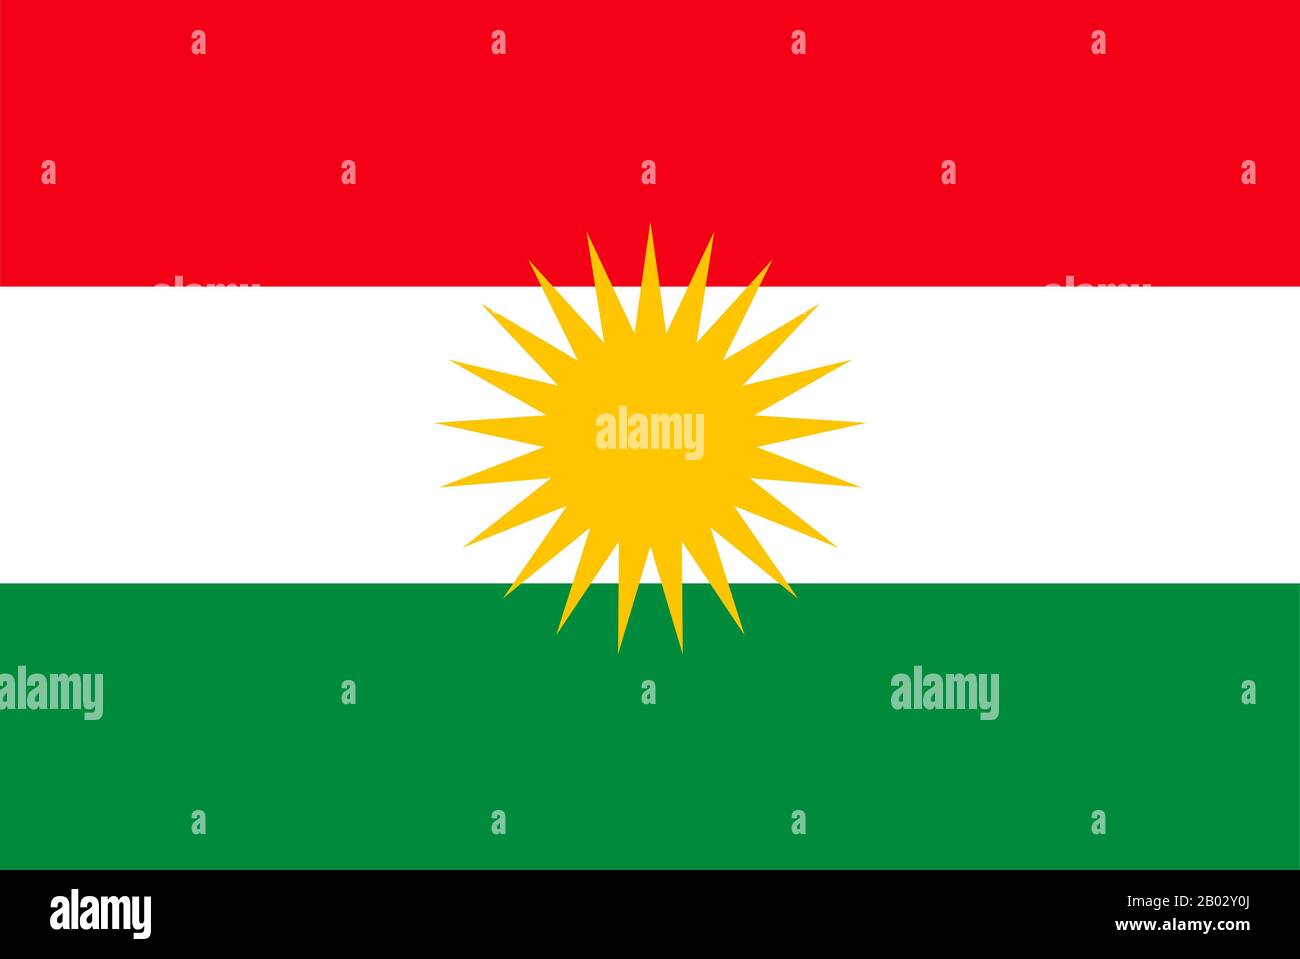 The Flag of Kurdistan, also called Alaya Rengin ('The Colorful Flag') first appeared during the movement for Kurdish independence from the Ottoman Empire.  Consisting of a tricolor of red, white, and green horizontal bands with a yellow sun disk of 21 rays at its center, it is currently the official flag of the autonomous Kurdistan Region in Iraq, which is under the control of the Kurdistan Regional Government. Stock Photo